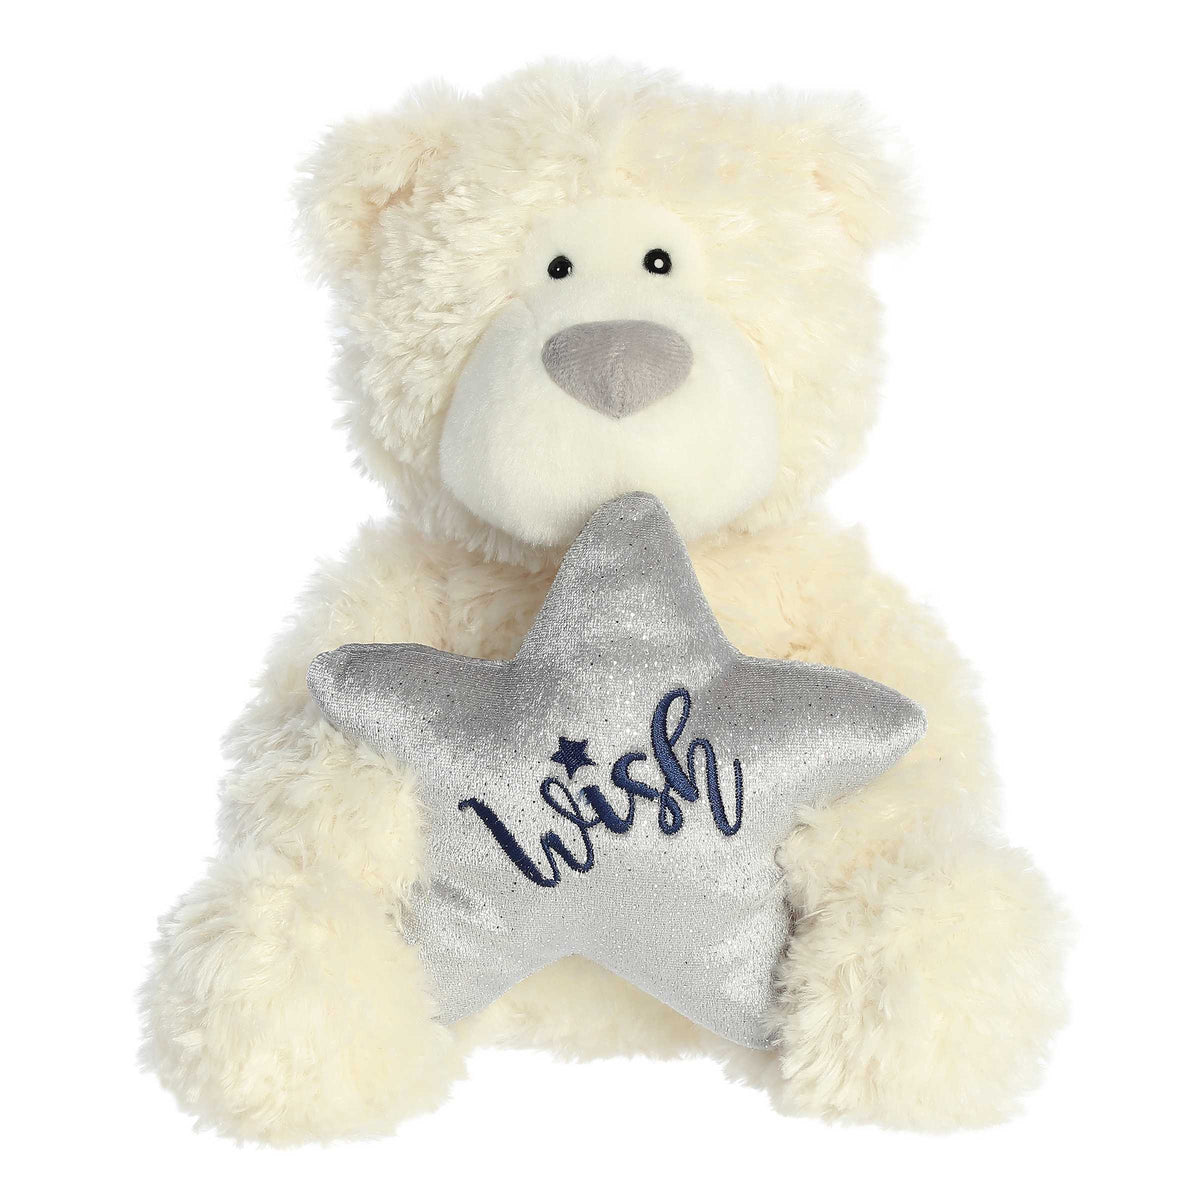 Soft and cuddly white teddy bear with non-detachable shiny silver star embroidered across with 'Wish'